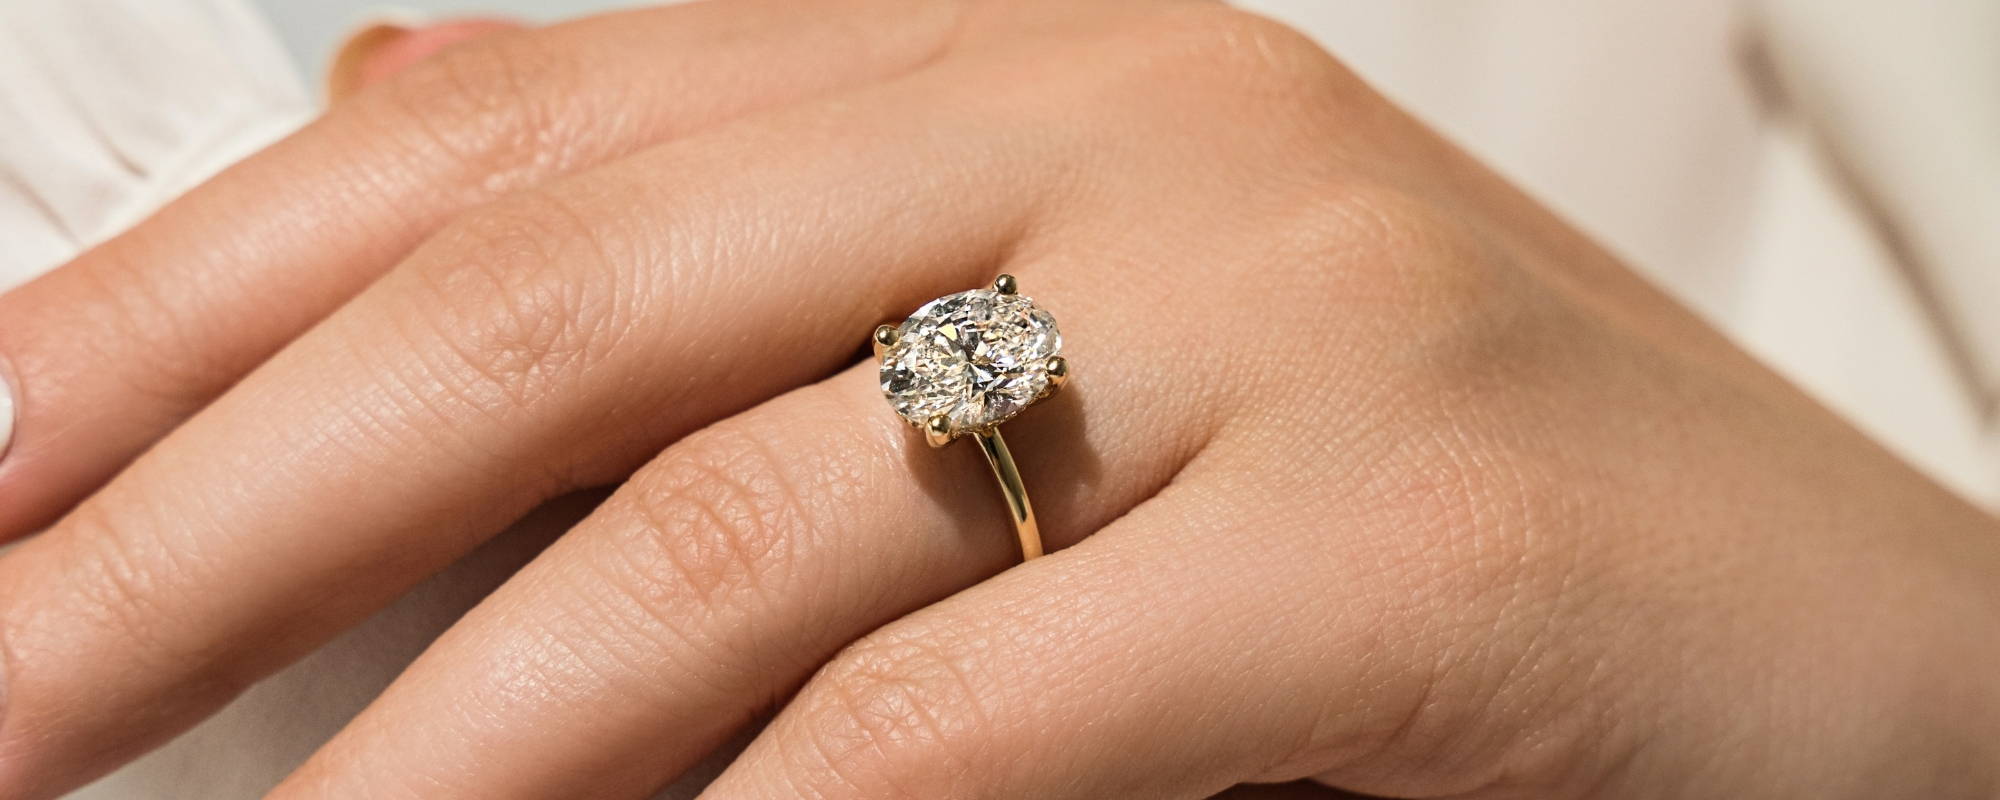 Top 10 Hottest Engagement Rings for a Holiday Proposal